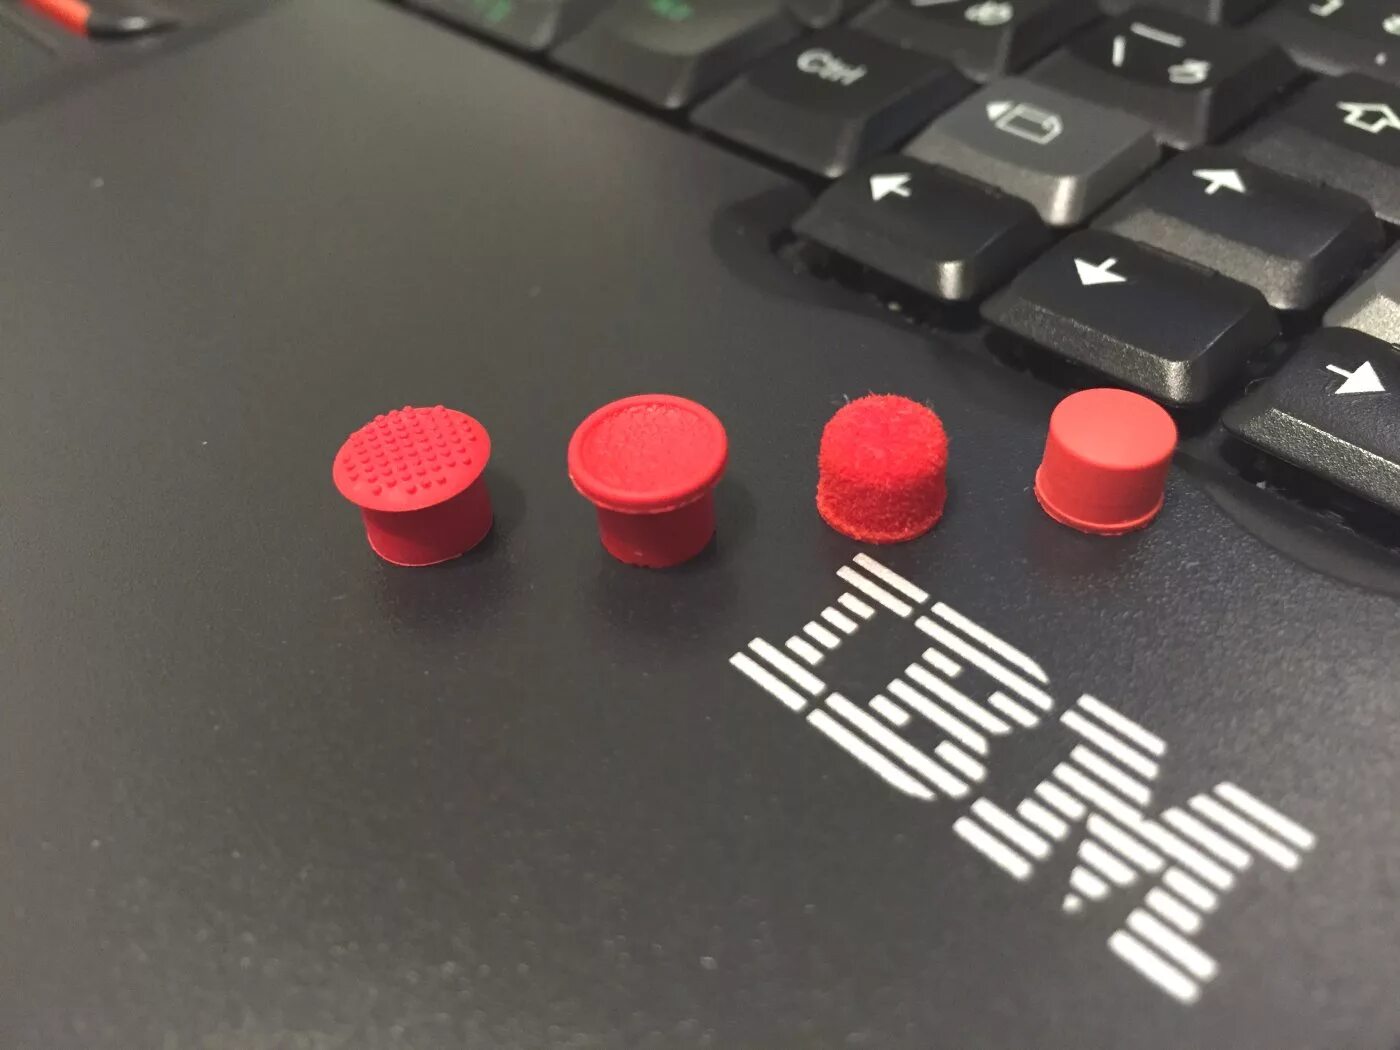 THINKPAD TRACKPOINT. IBM TRACKPOINT. IBM THINKPAD. TRACKPOINT клавиатура.